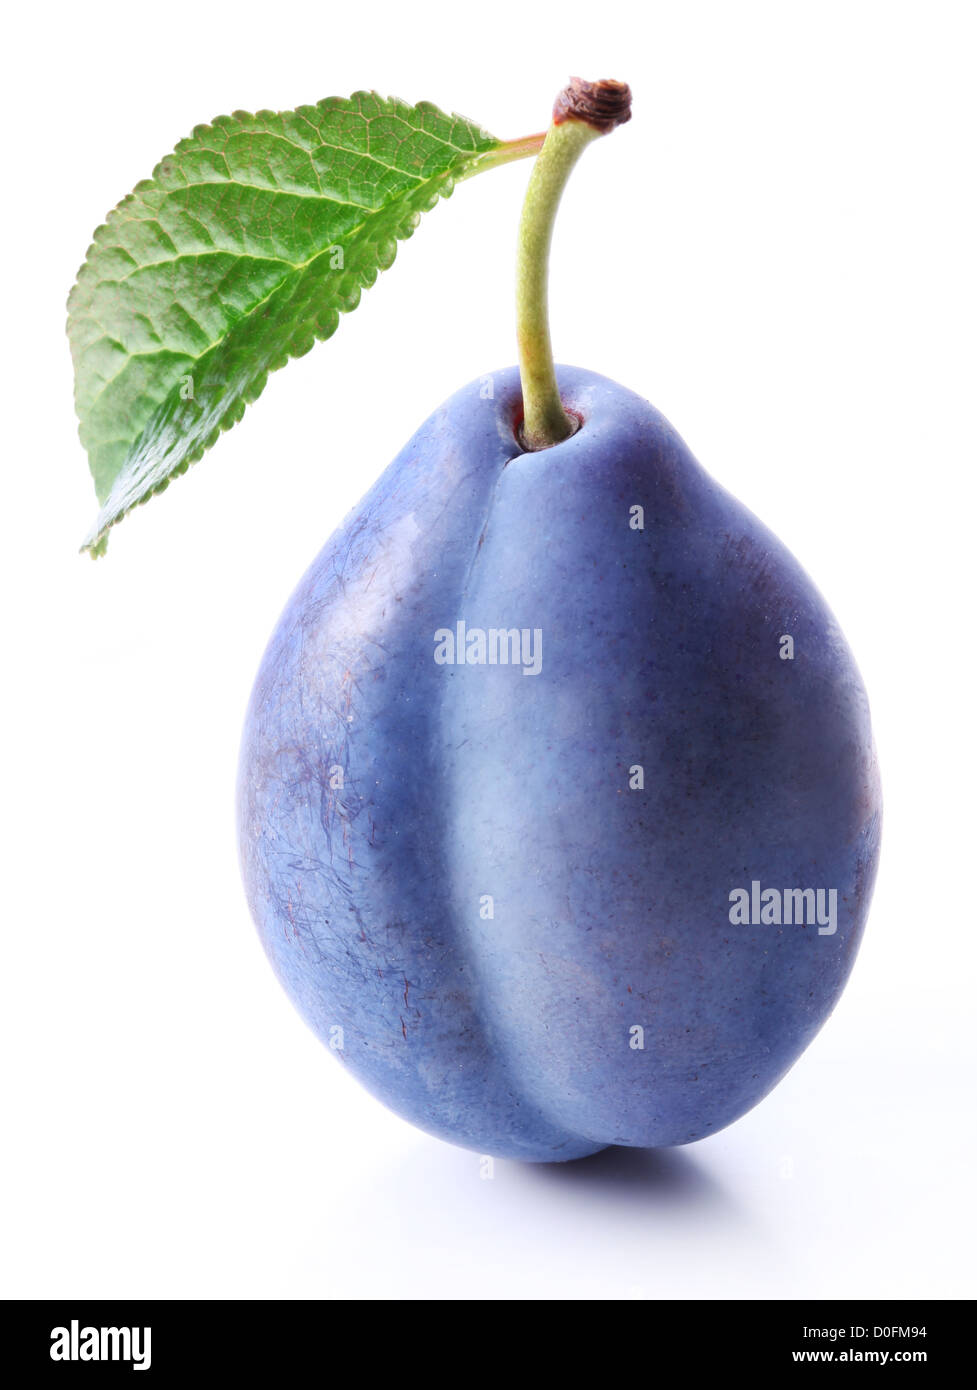 Plum with a leaf on a white background. Stock Photo